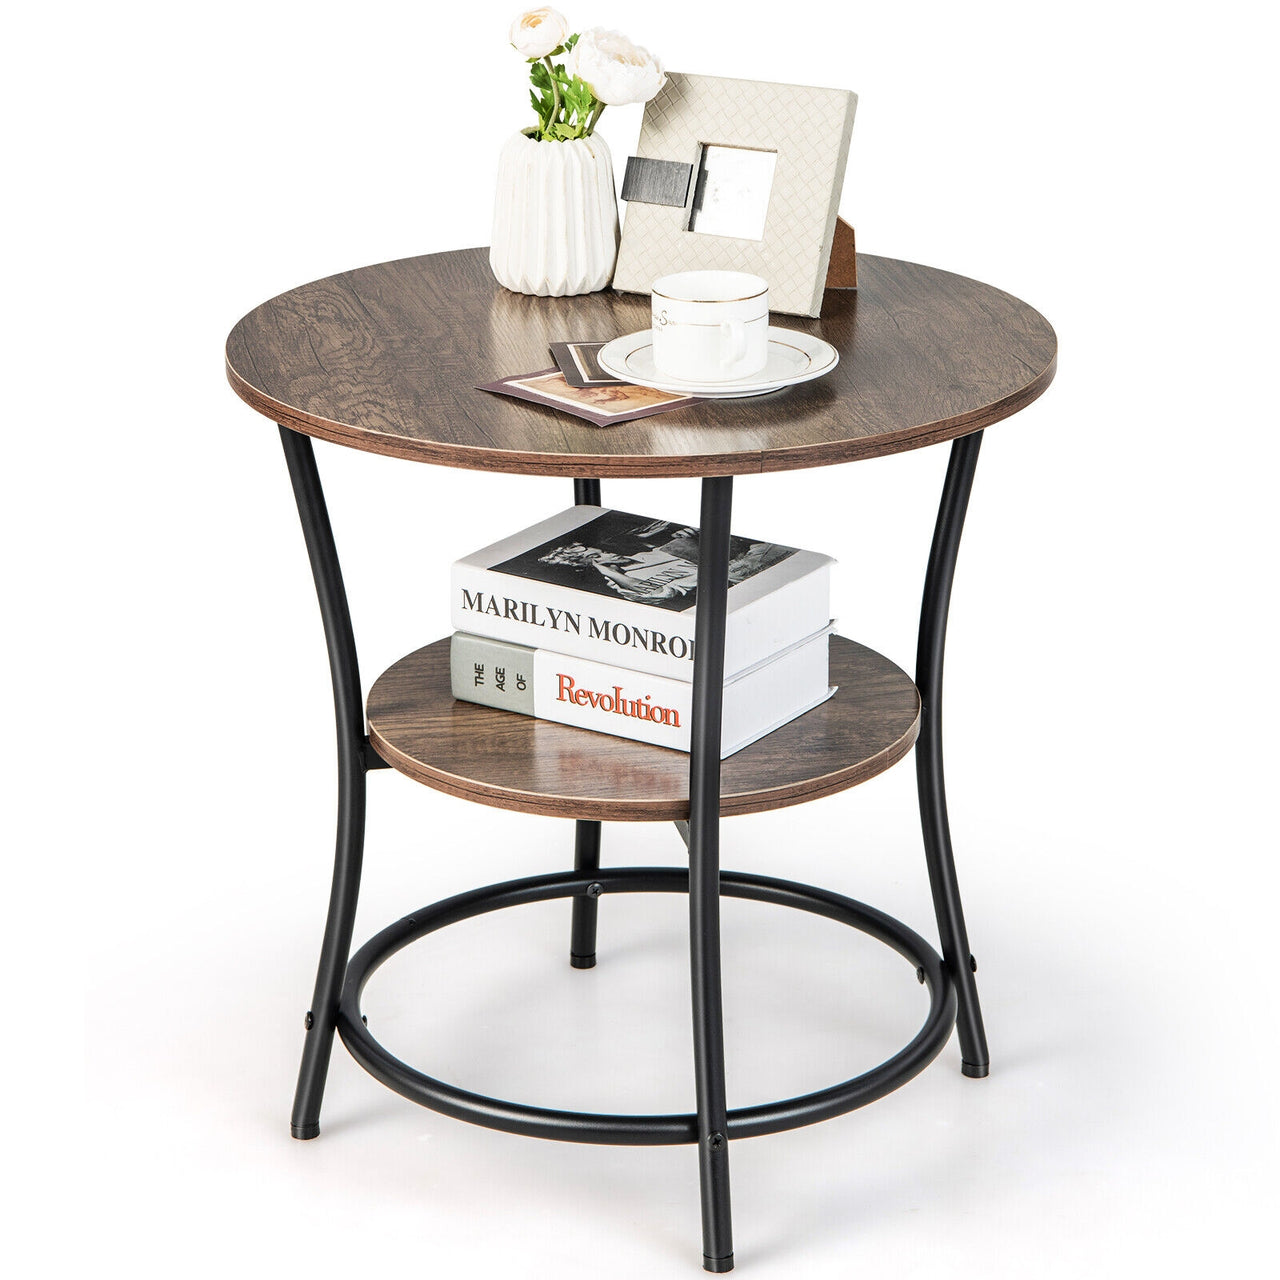 2-Tier Round End Table with Open Storage Shelf and Sturdy Metal Frame - Gallery View 1 of 9